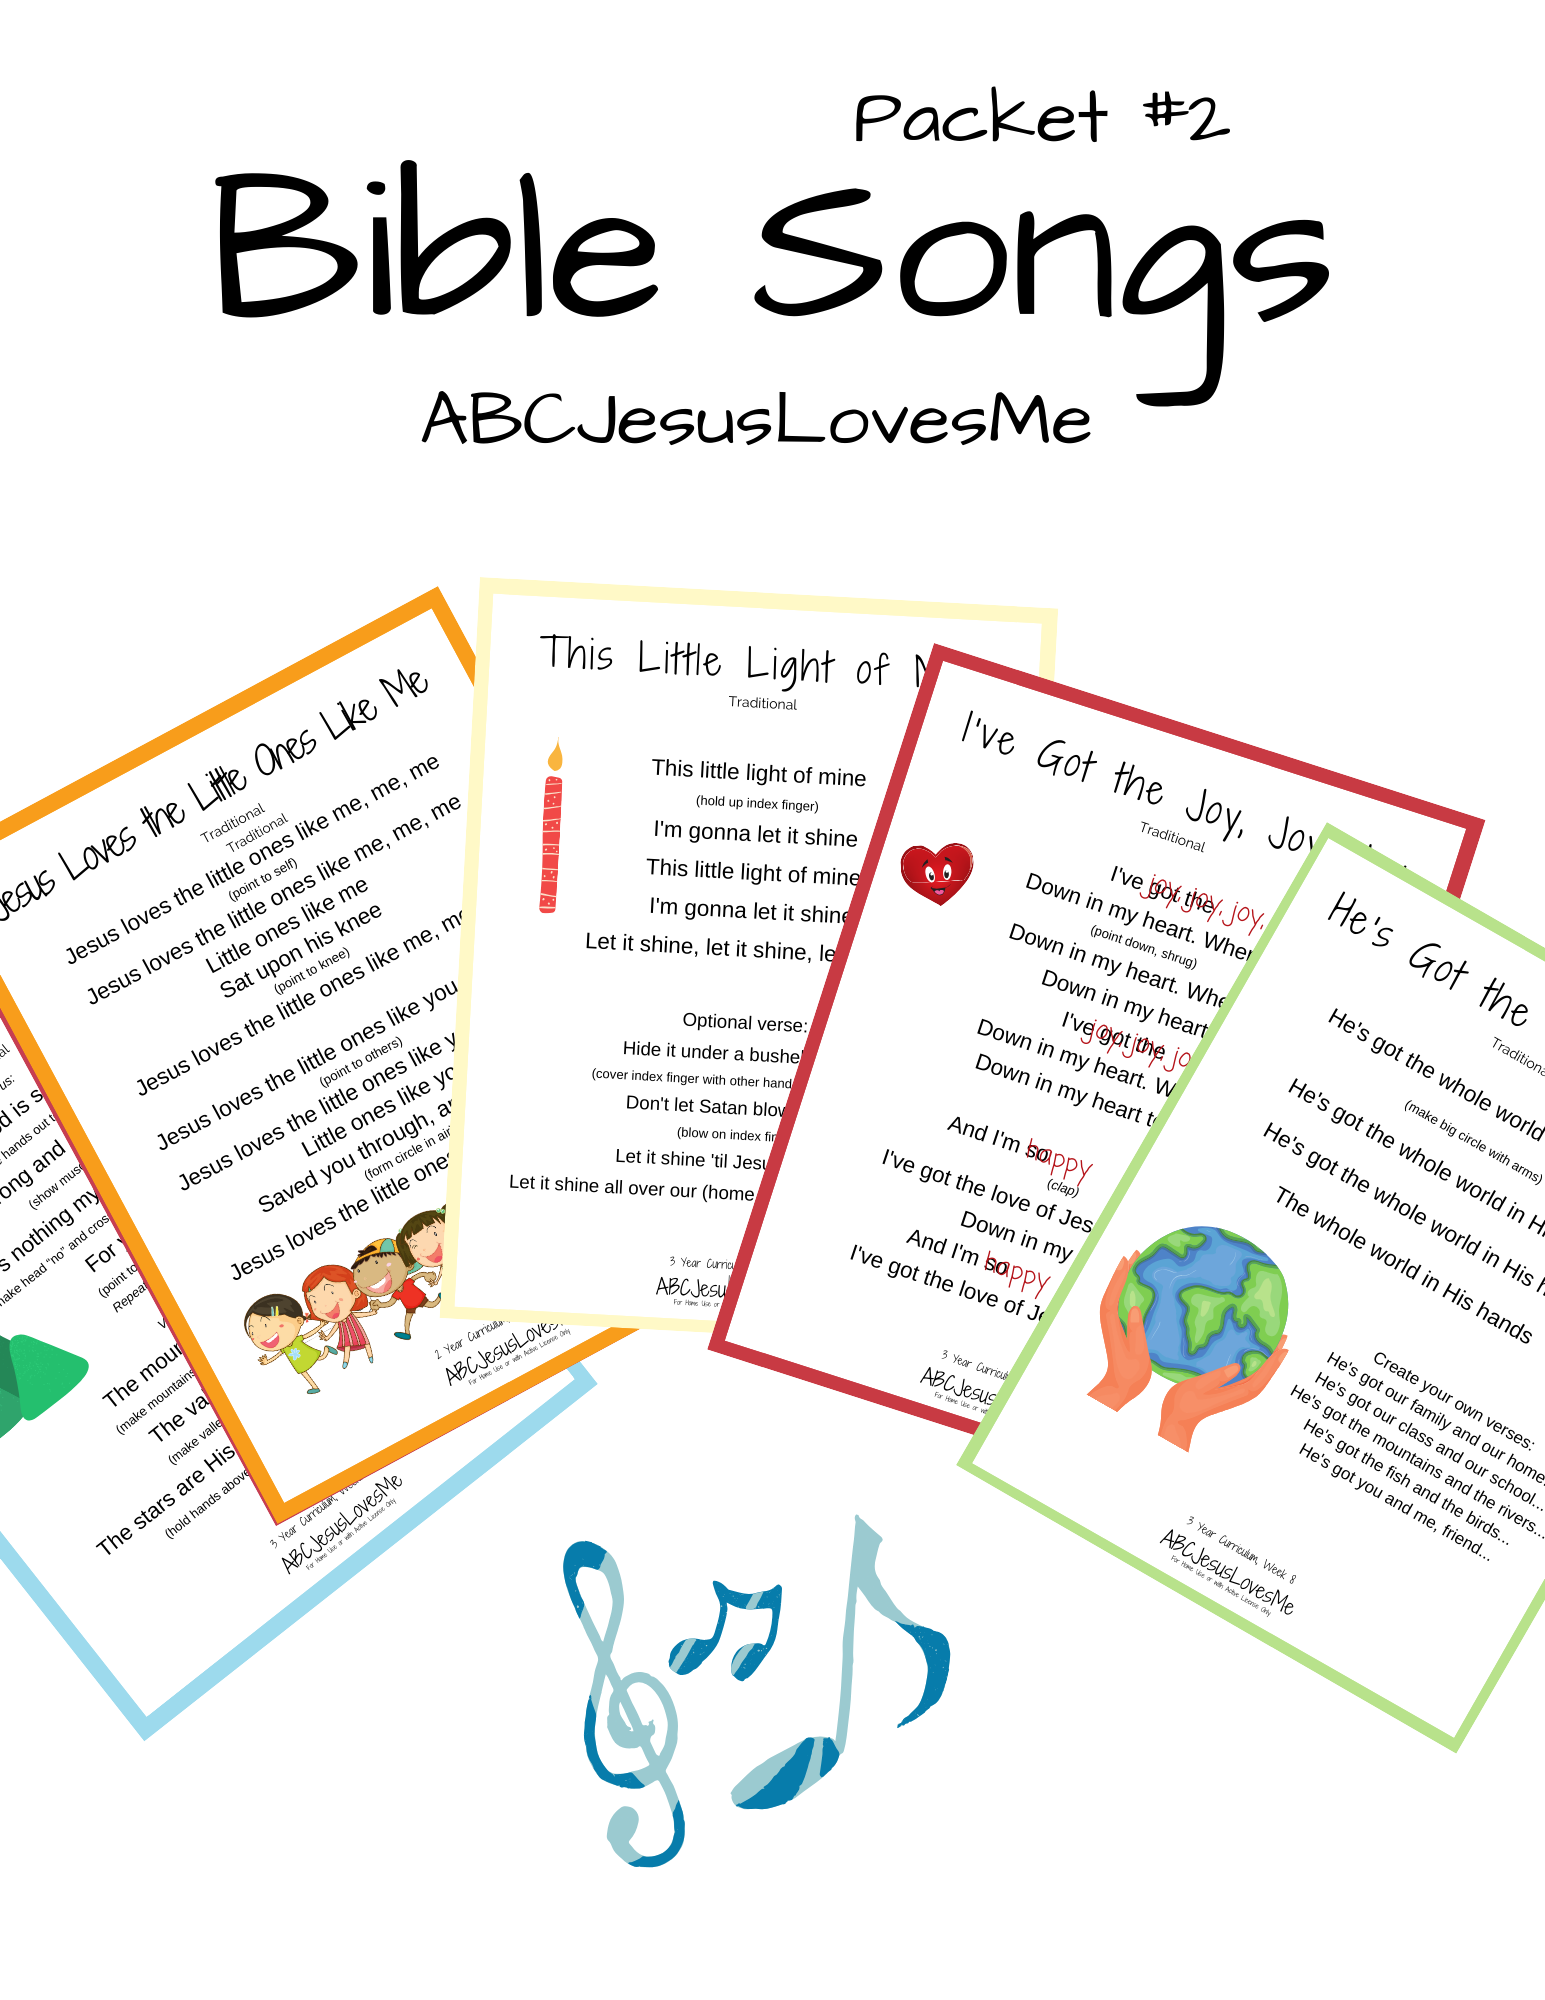 Bible Songs Packet #2